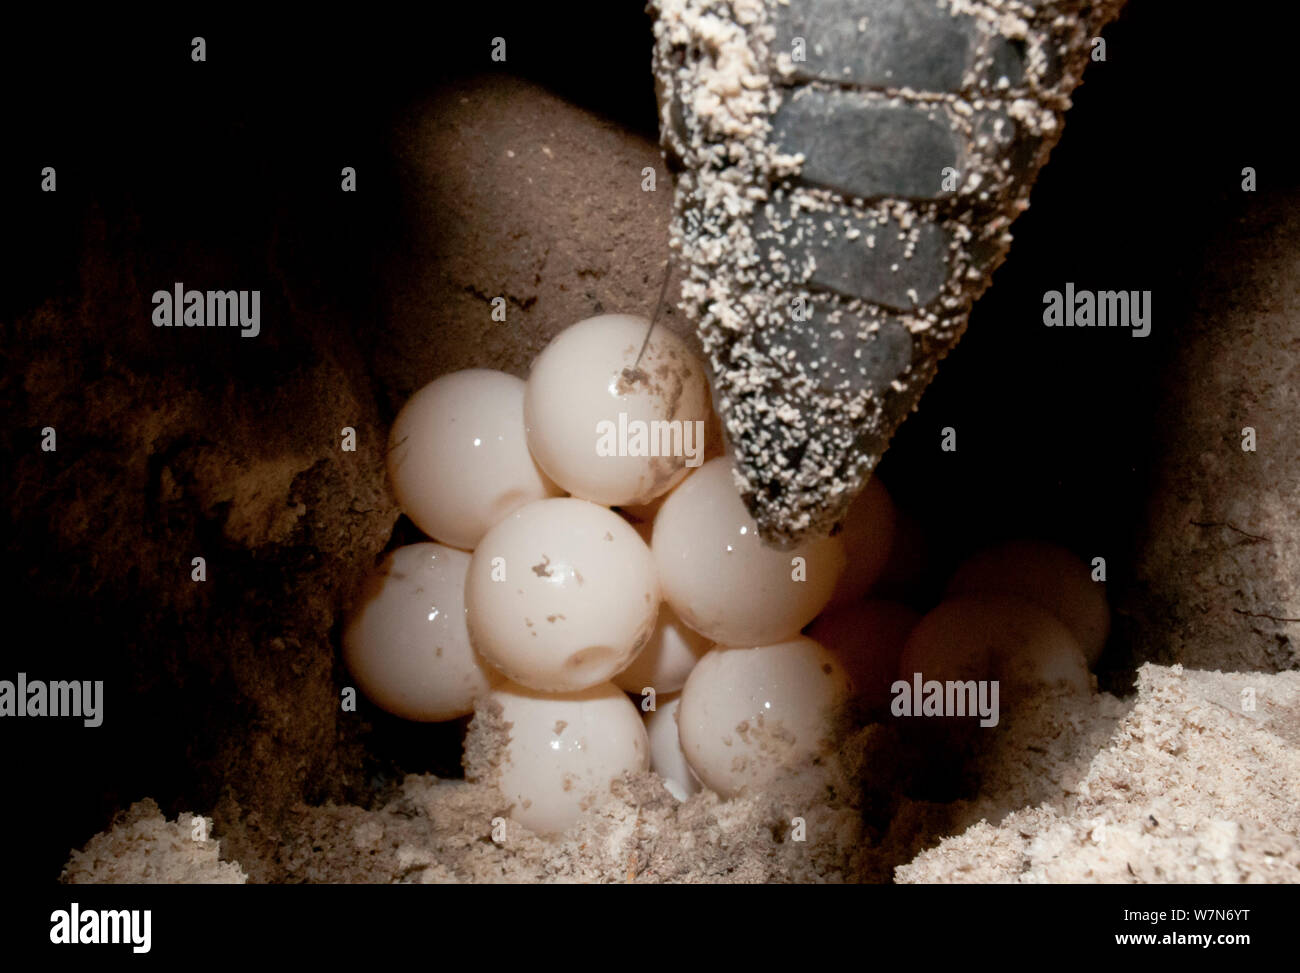 Green turtle (Chelonia mydas) laying its eggs in nest on beach, Aldabra Atoll, Seychelles, Indian Ocean Stock Photo